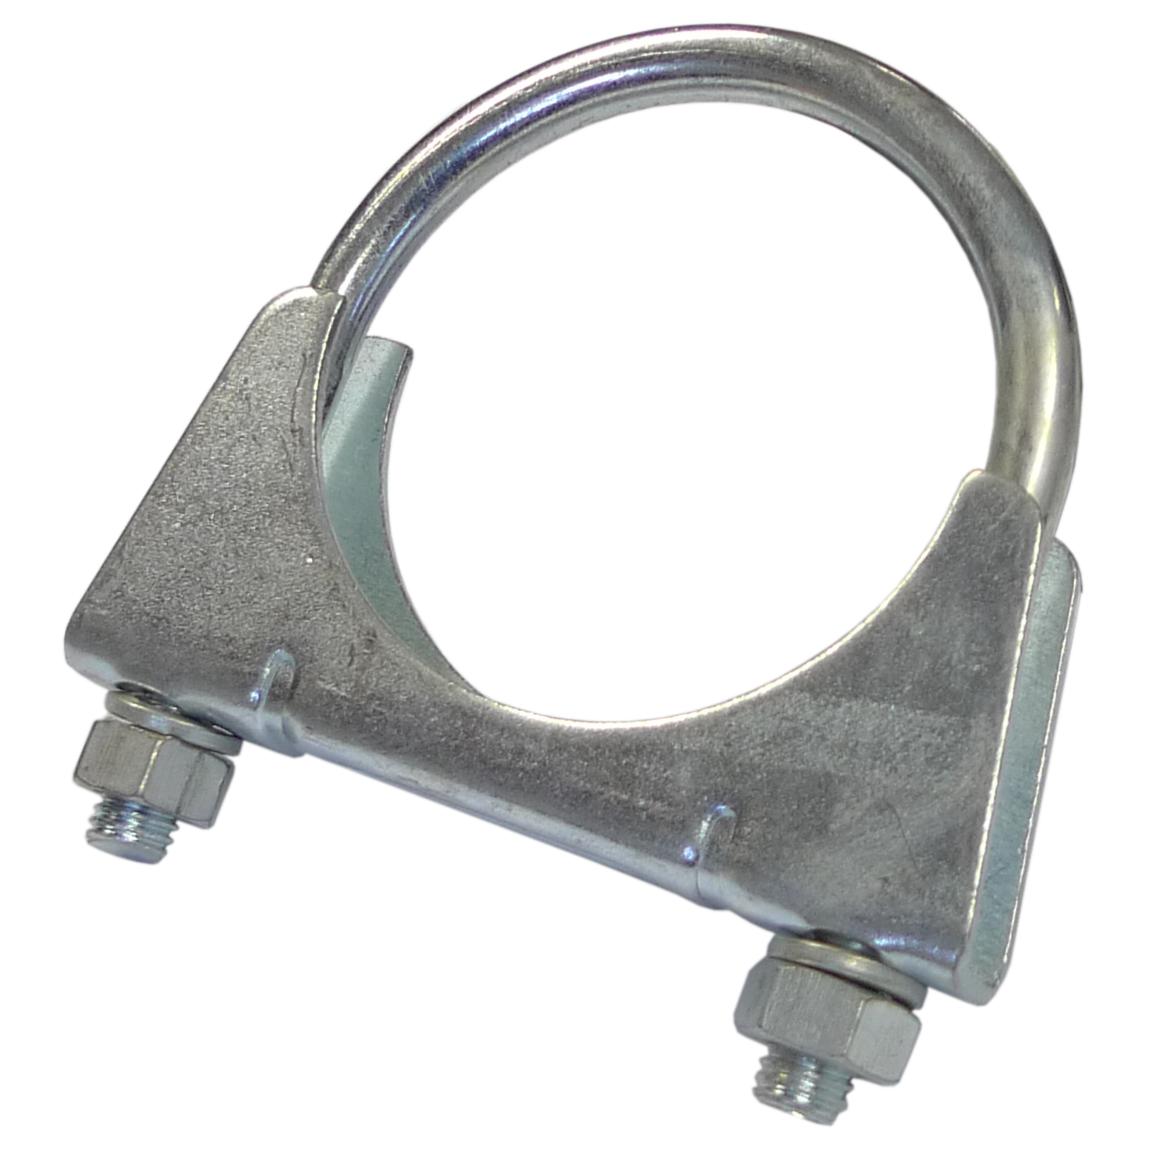 64mm Exhaust Clamps Size 